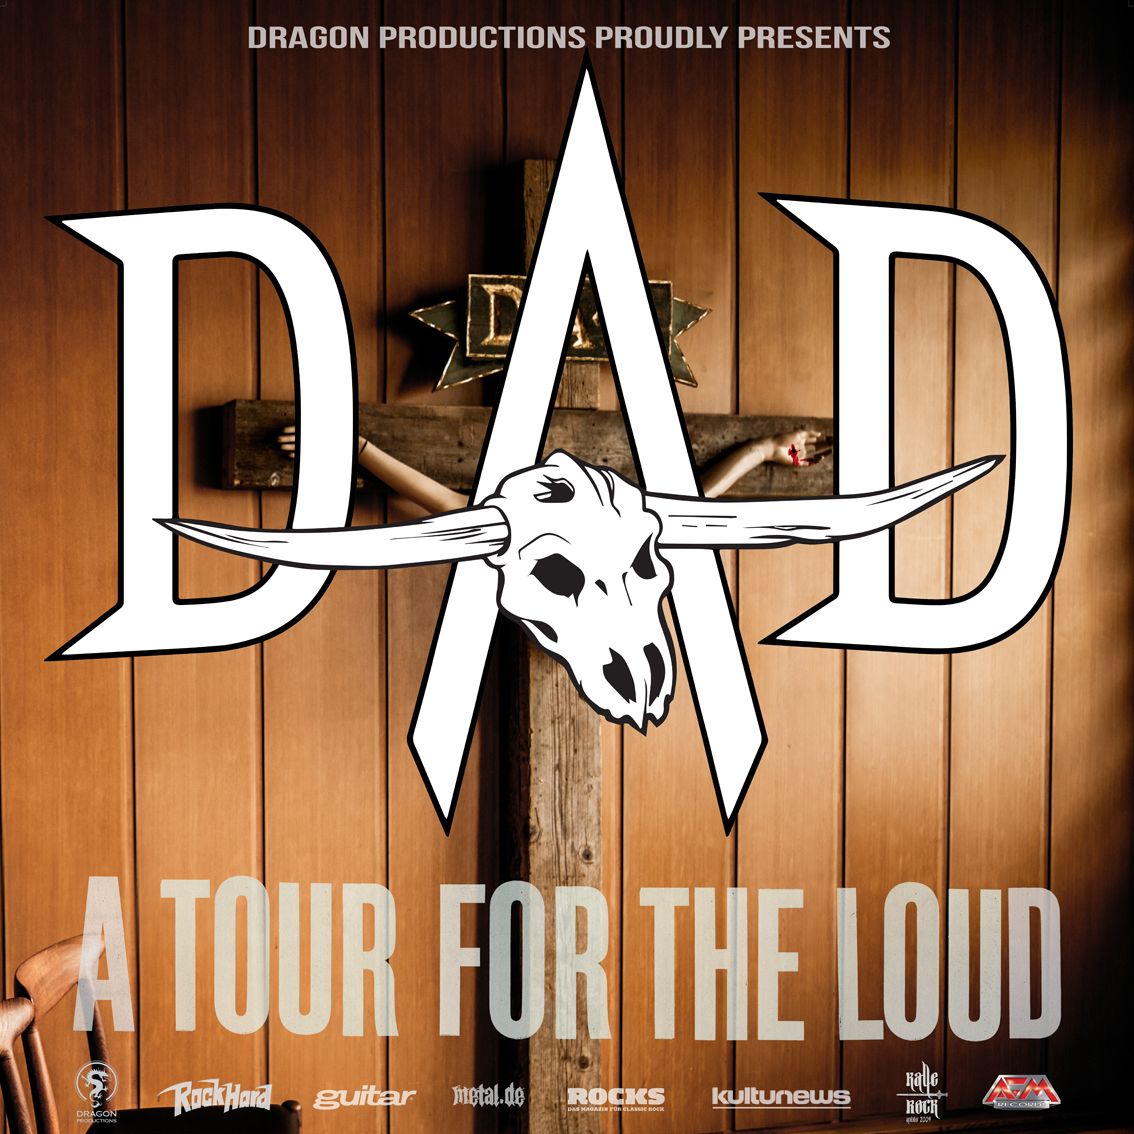 DAD_DRAGON_POSTER_ALL_square_small_1280x1280.jpg